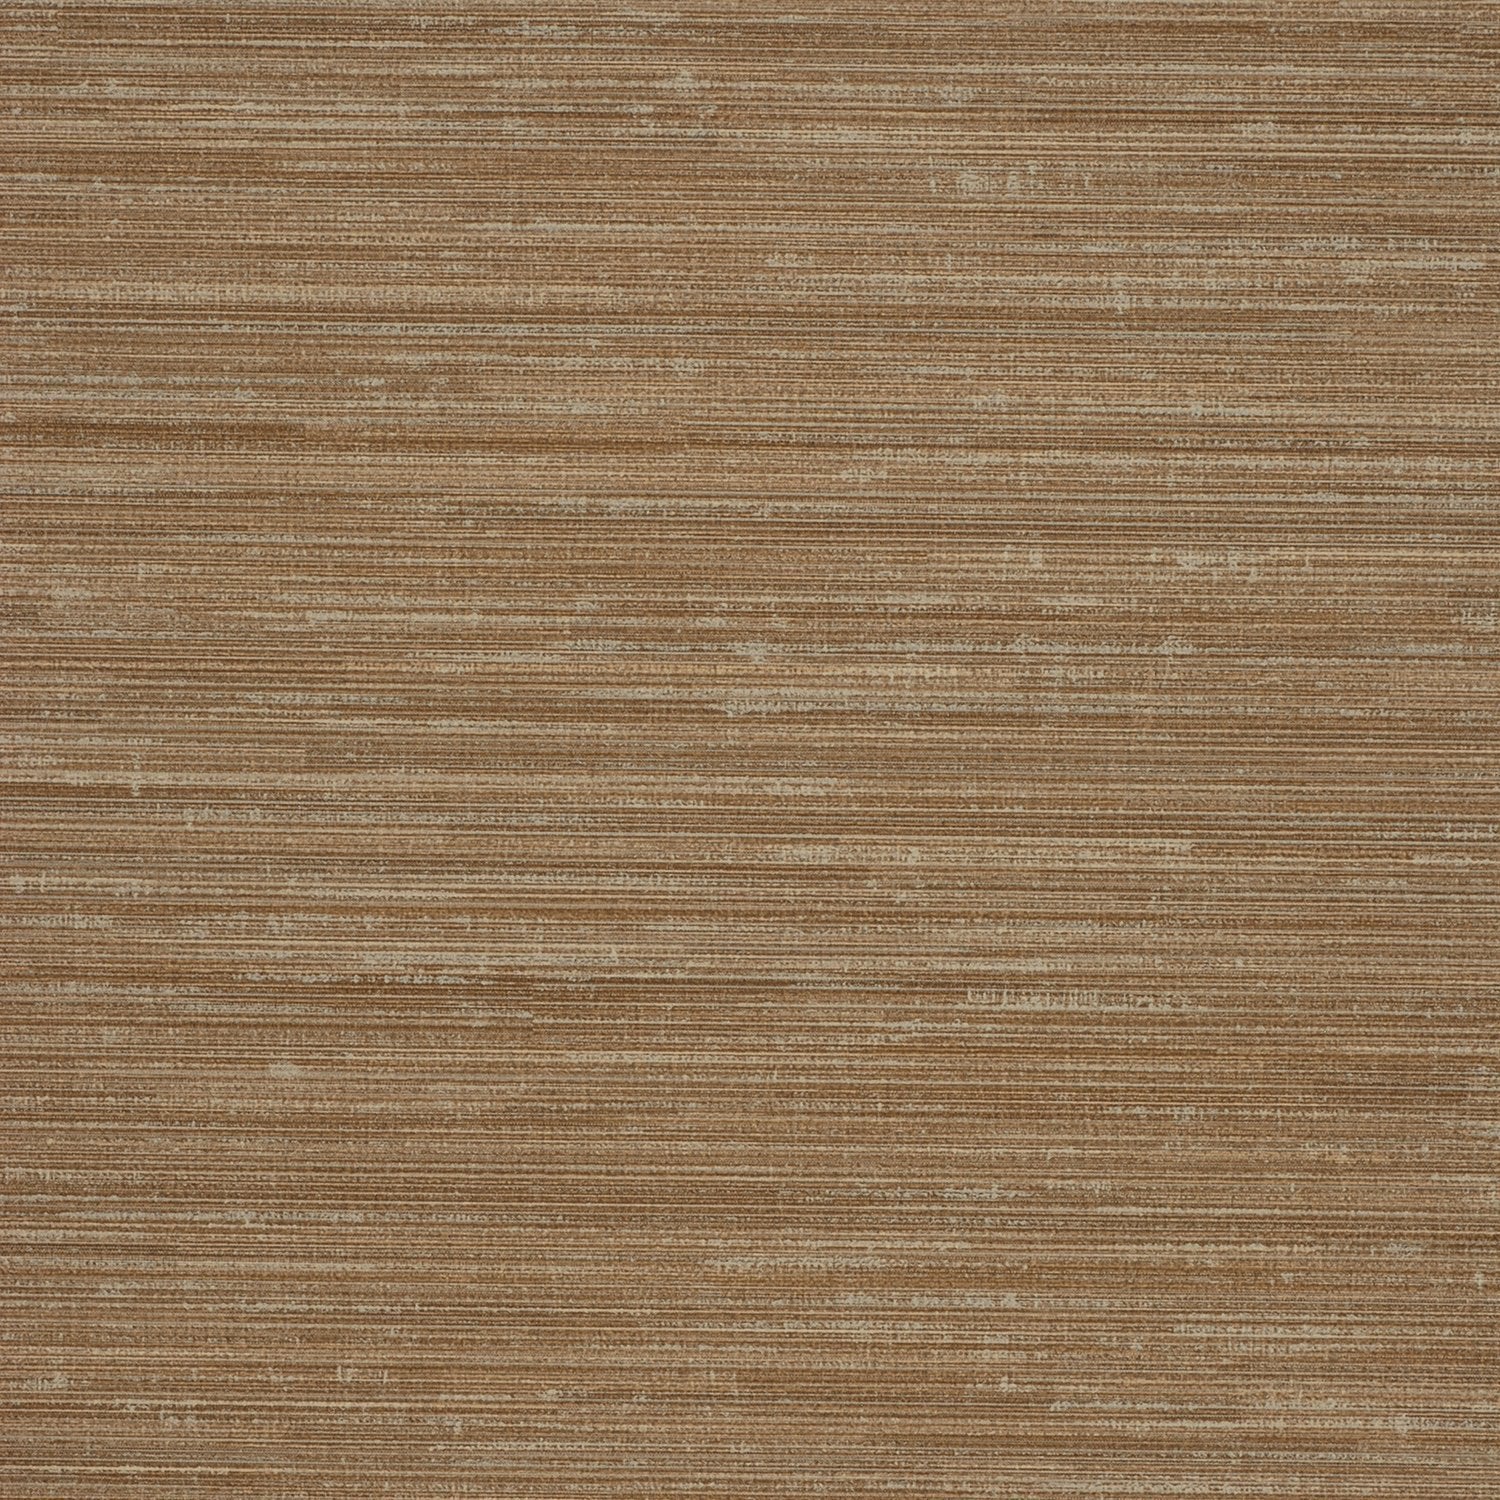 Casbah Silk - Y46490 - Wallcovering - Vycon - Kube Contract